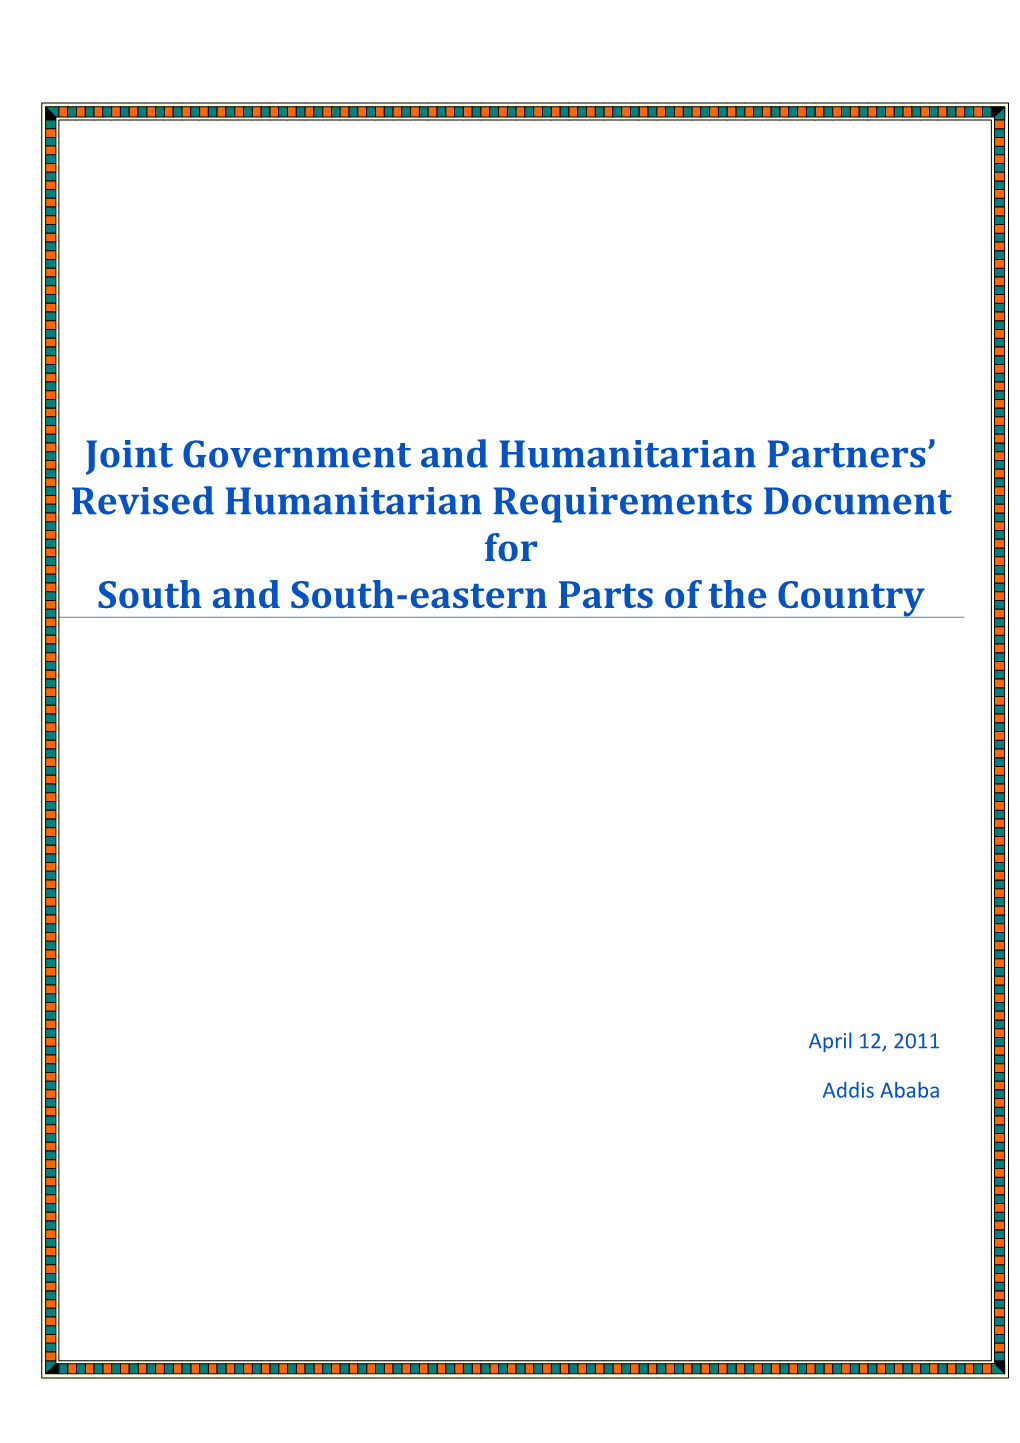 Joint Government and Humanitarian Partners' Revised Humanitarian